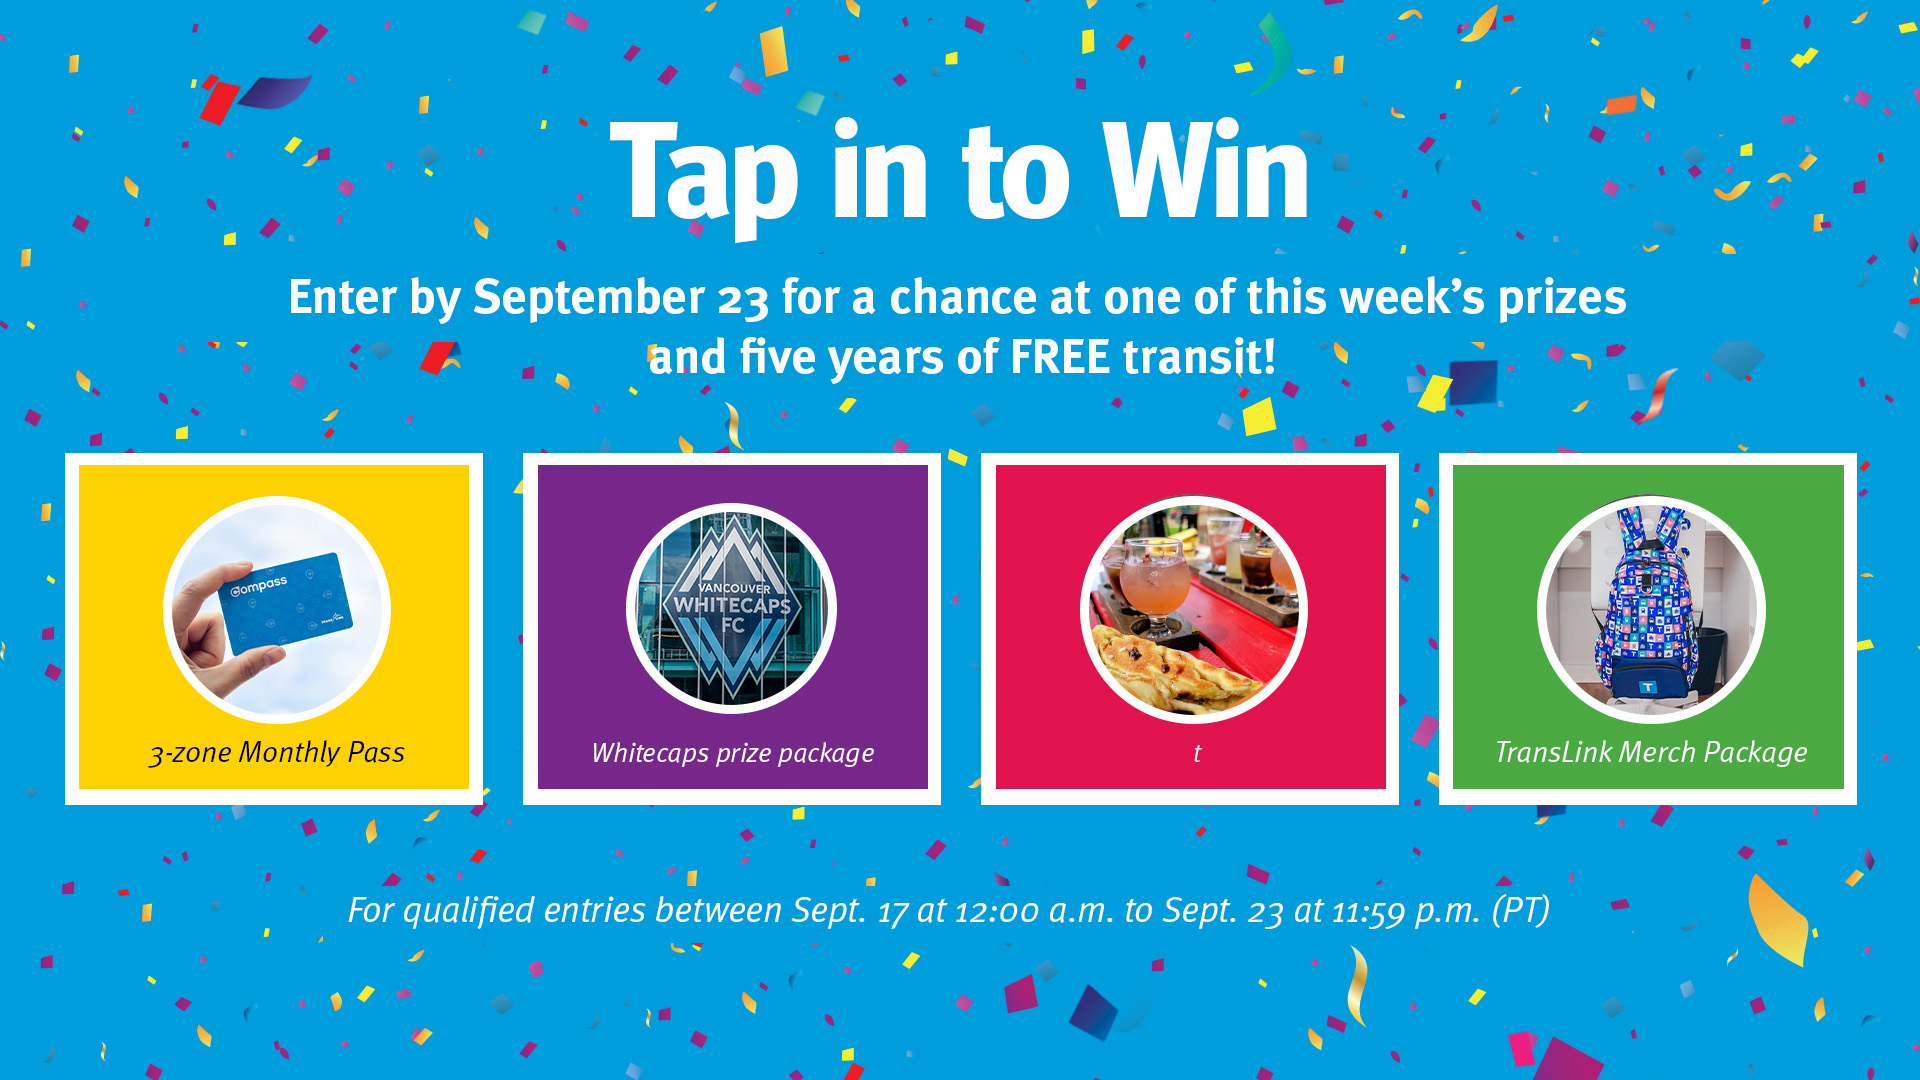 Enter Tap in to Win by Sept. 16 for a chance at one of seven prizes: a 3-zone Compass Monthly Pass, Mobi bike sharing prize package, Sea Safari Weekend in the North Shore Stay and Play package, transit merch, and Vancouver City Seaplane Tour package